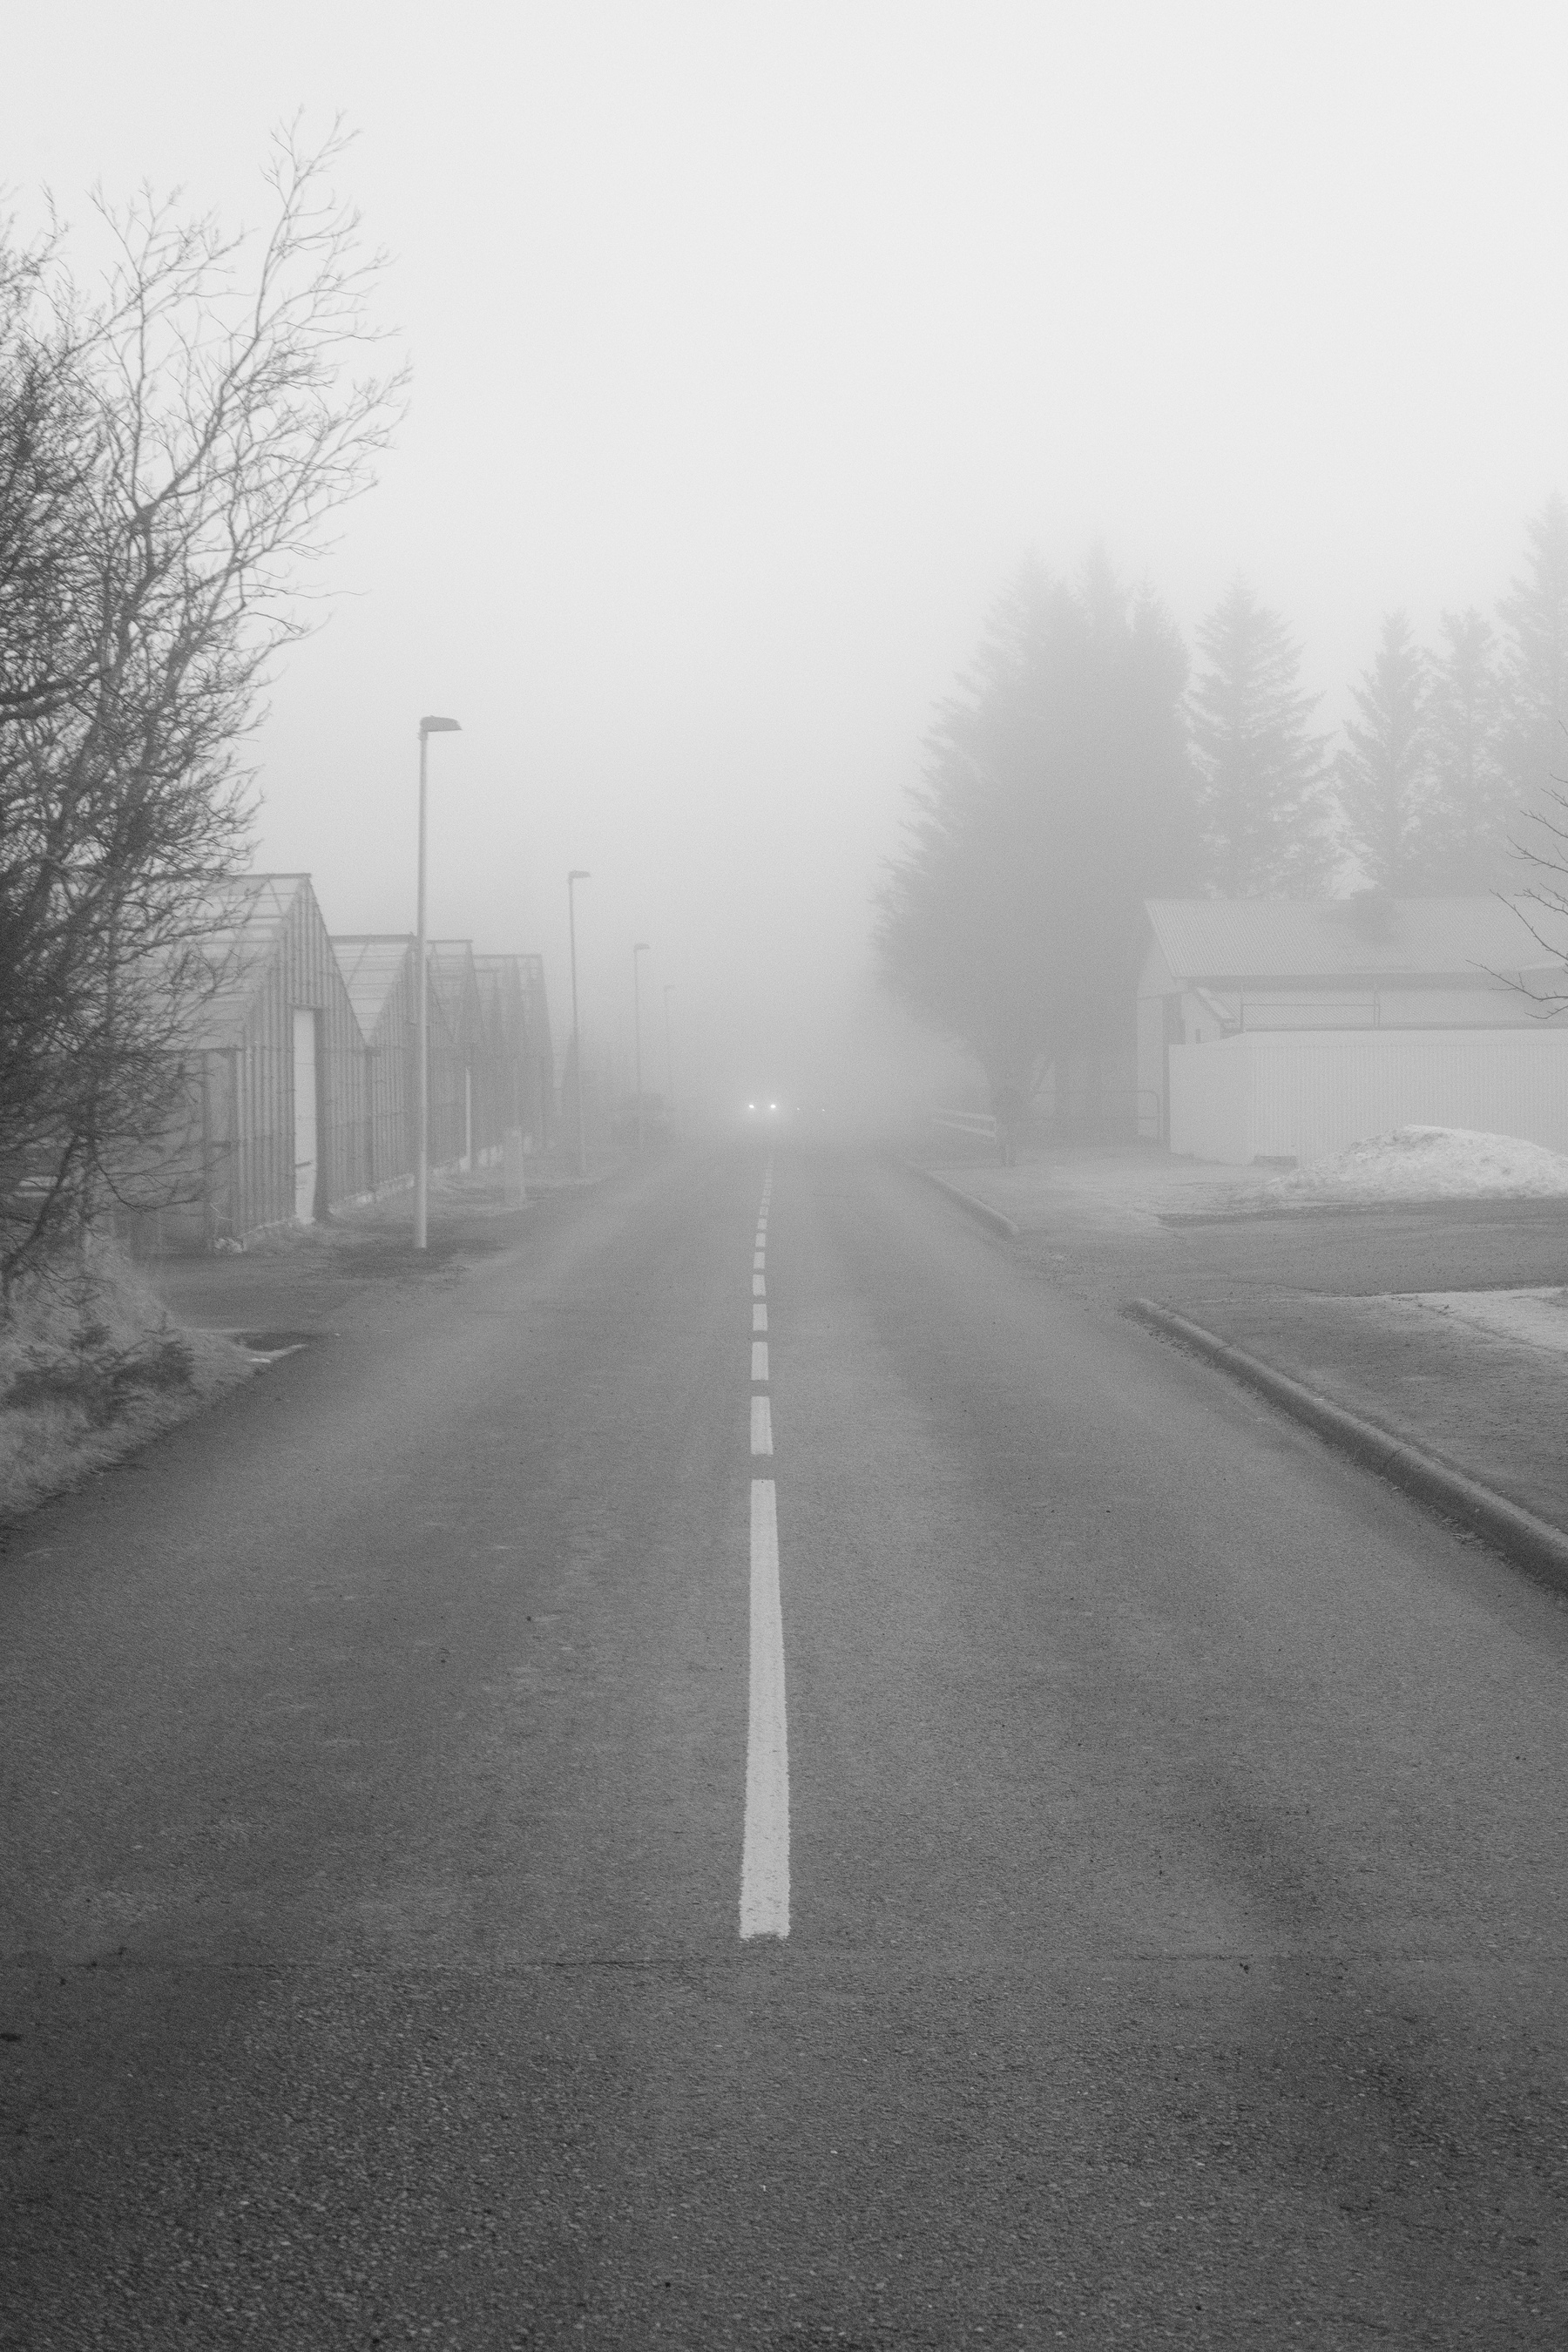 The view down a street covered with fog. The road is lined by commercial greenhouses. In the distance we see the headlights of a car in the fog.